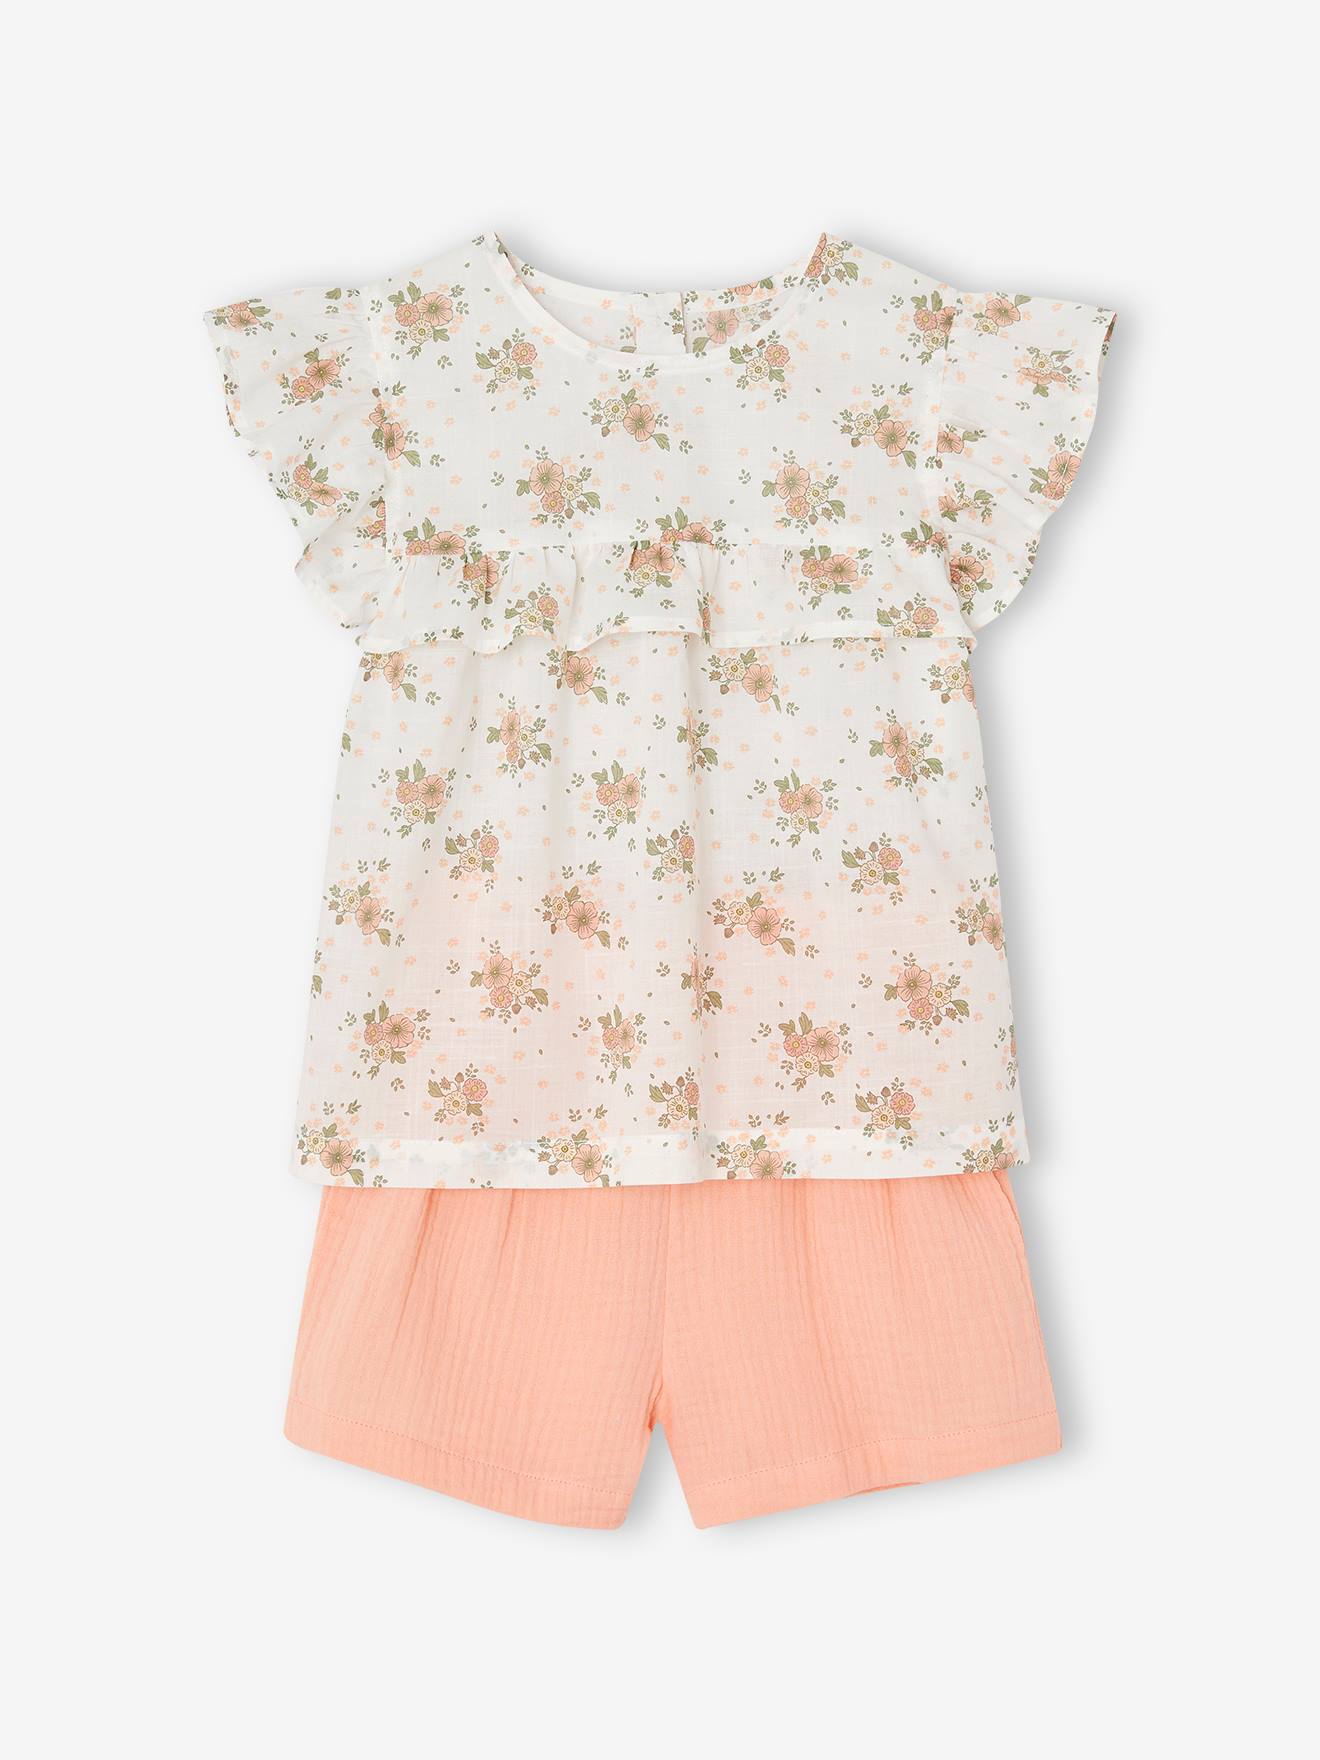 Occasion Wear Outfit: Blouse with Ruffles & Shorts in Cotton Gauze, for Girls printed pink